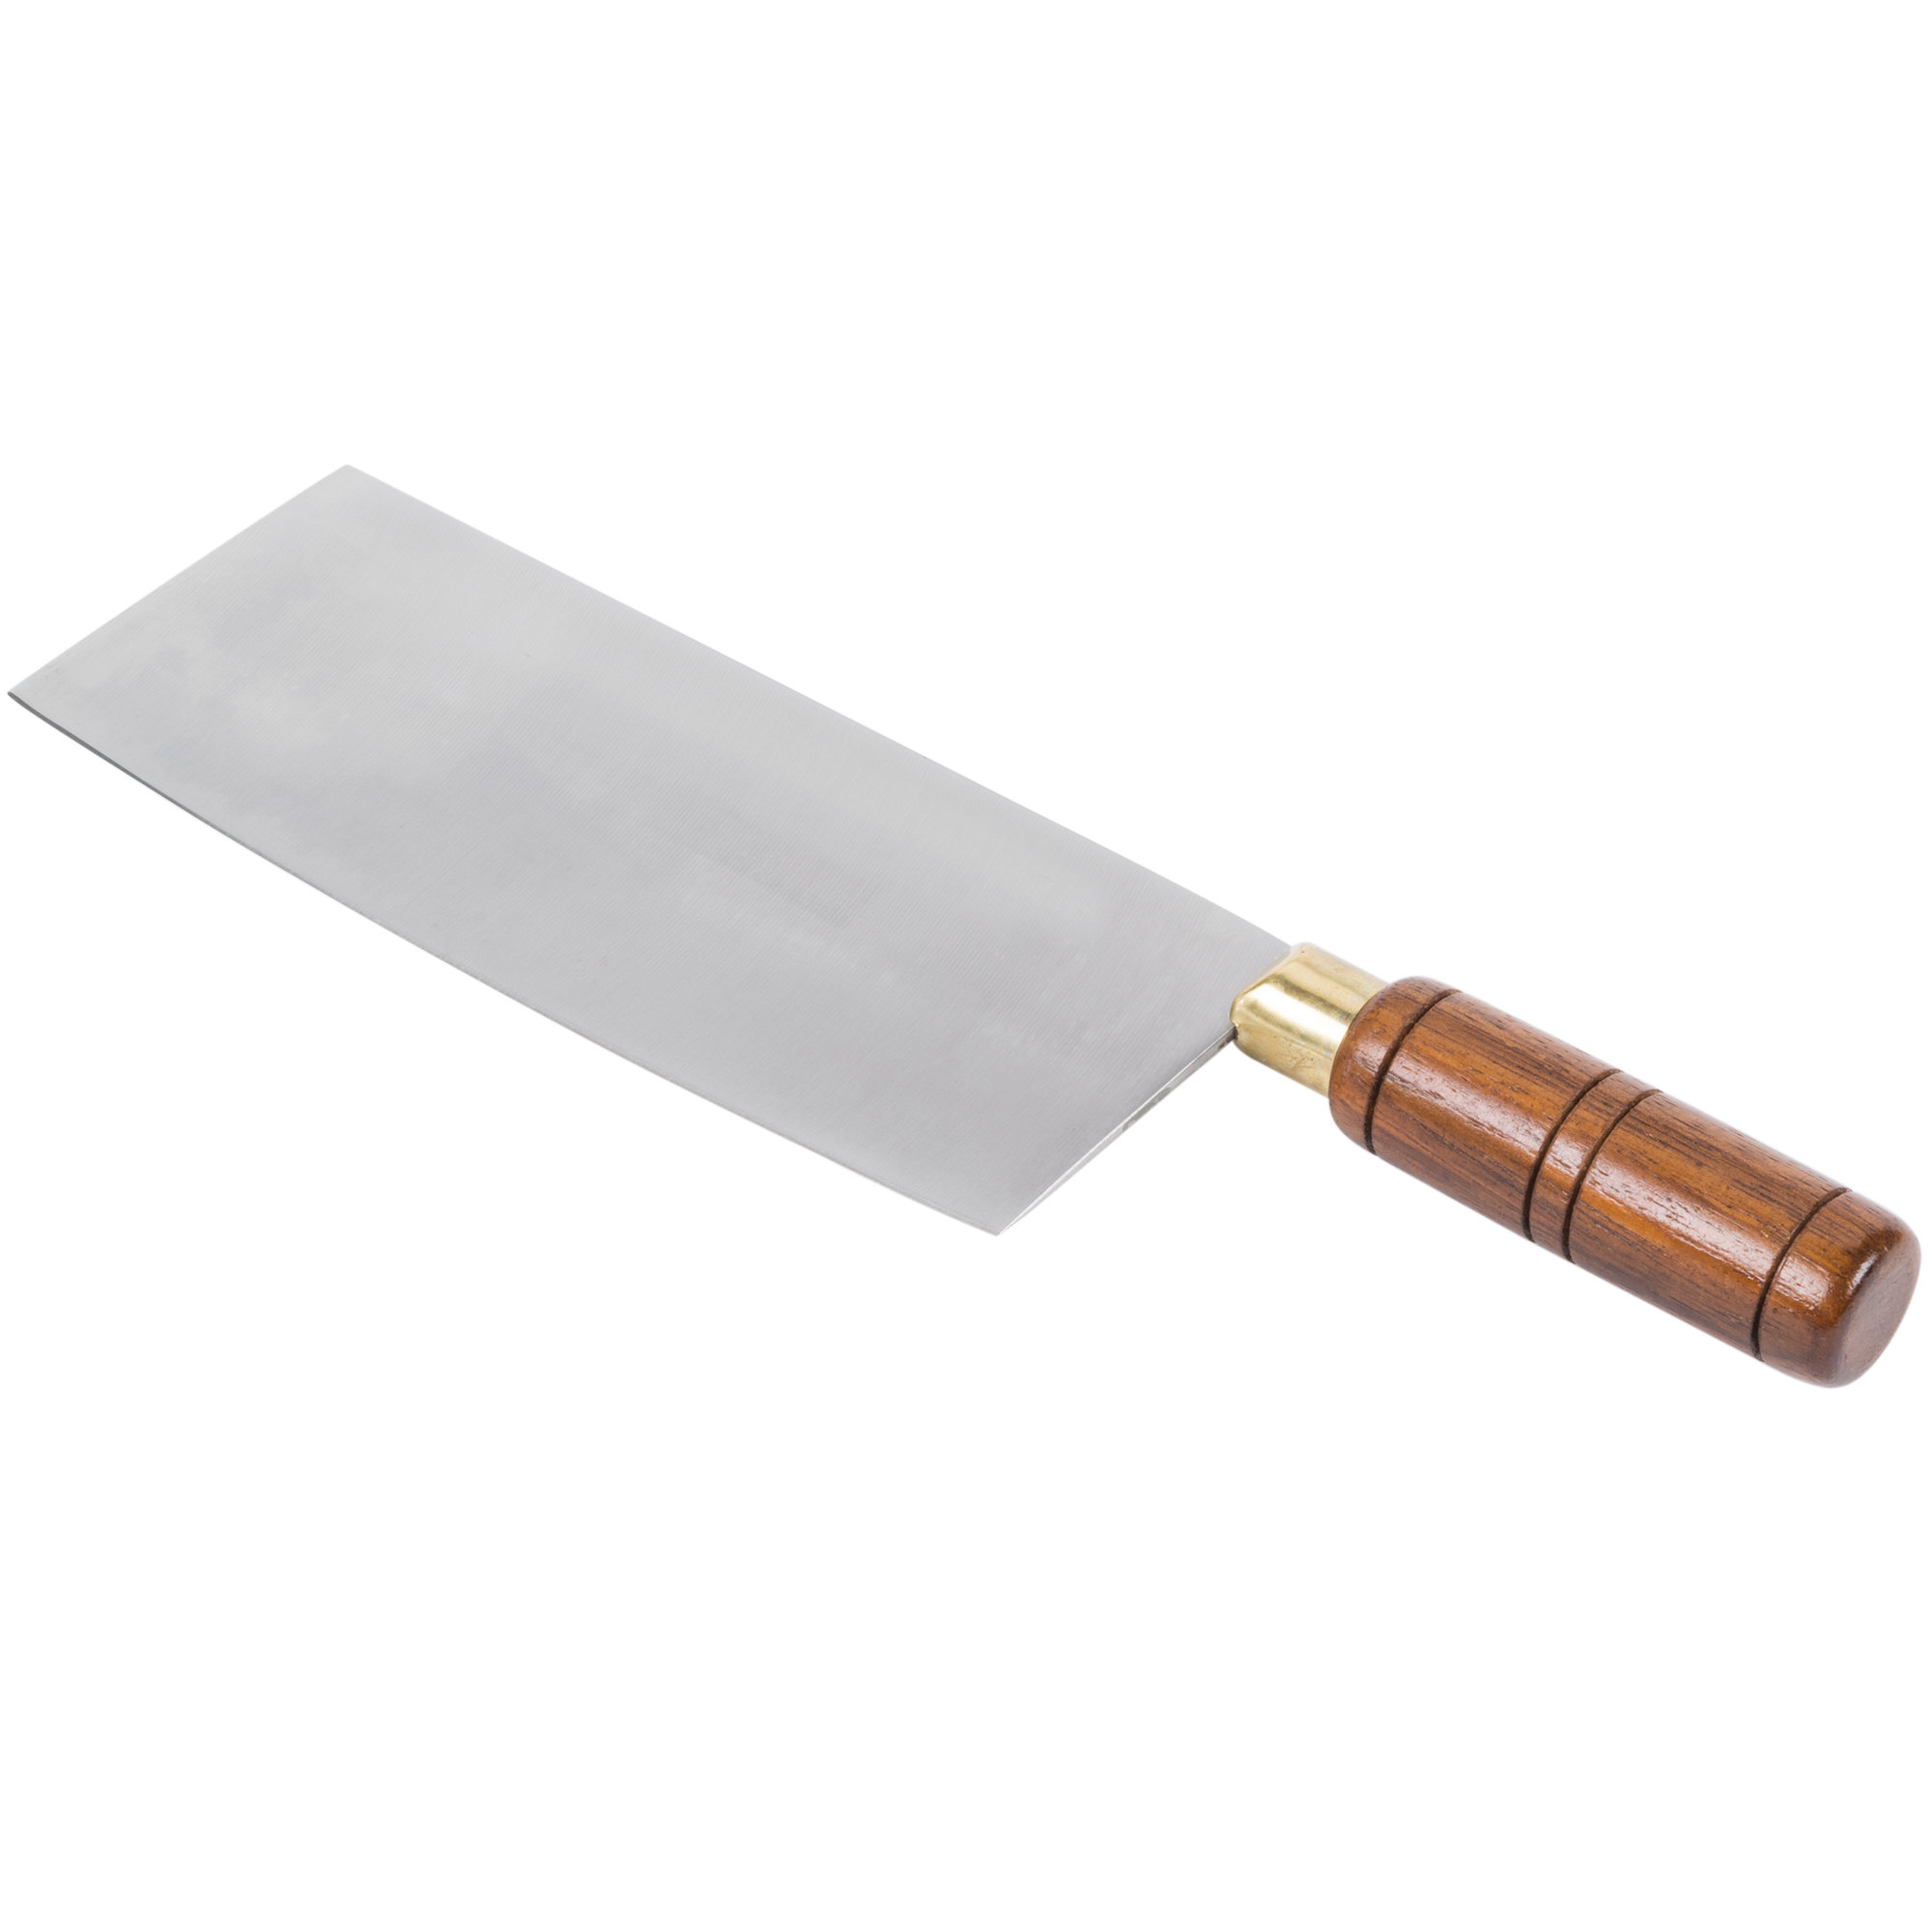 8'' Chinese Cleaver with Wood Handle